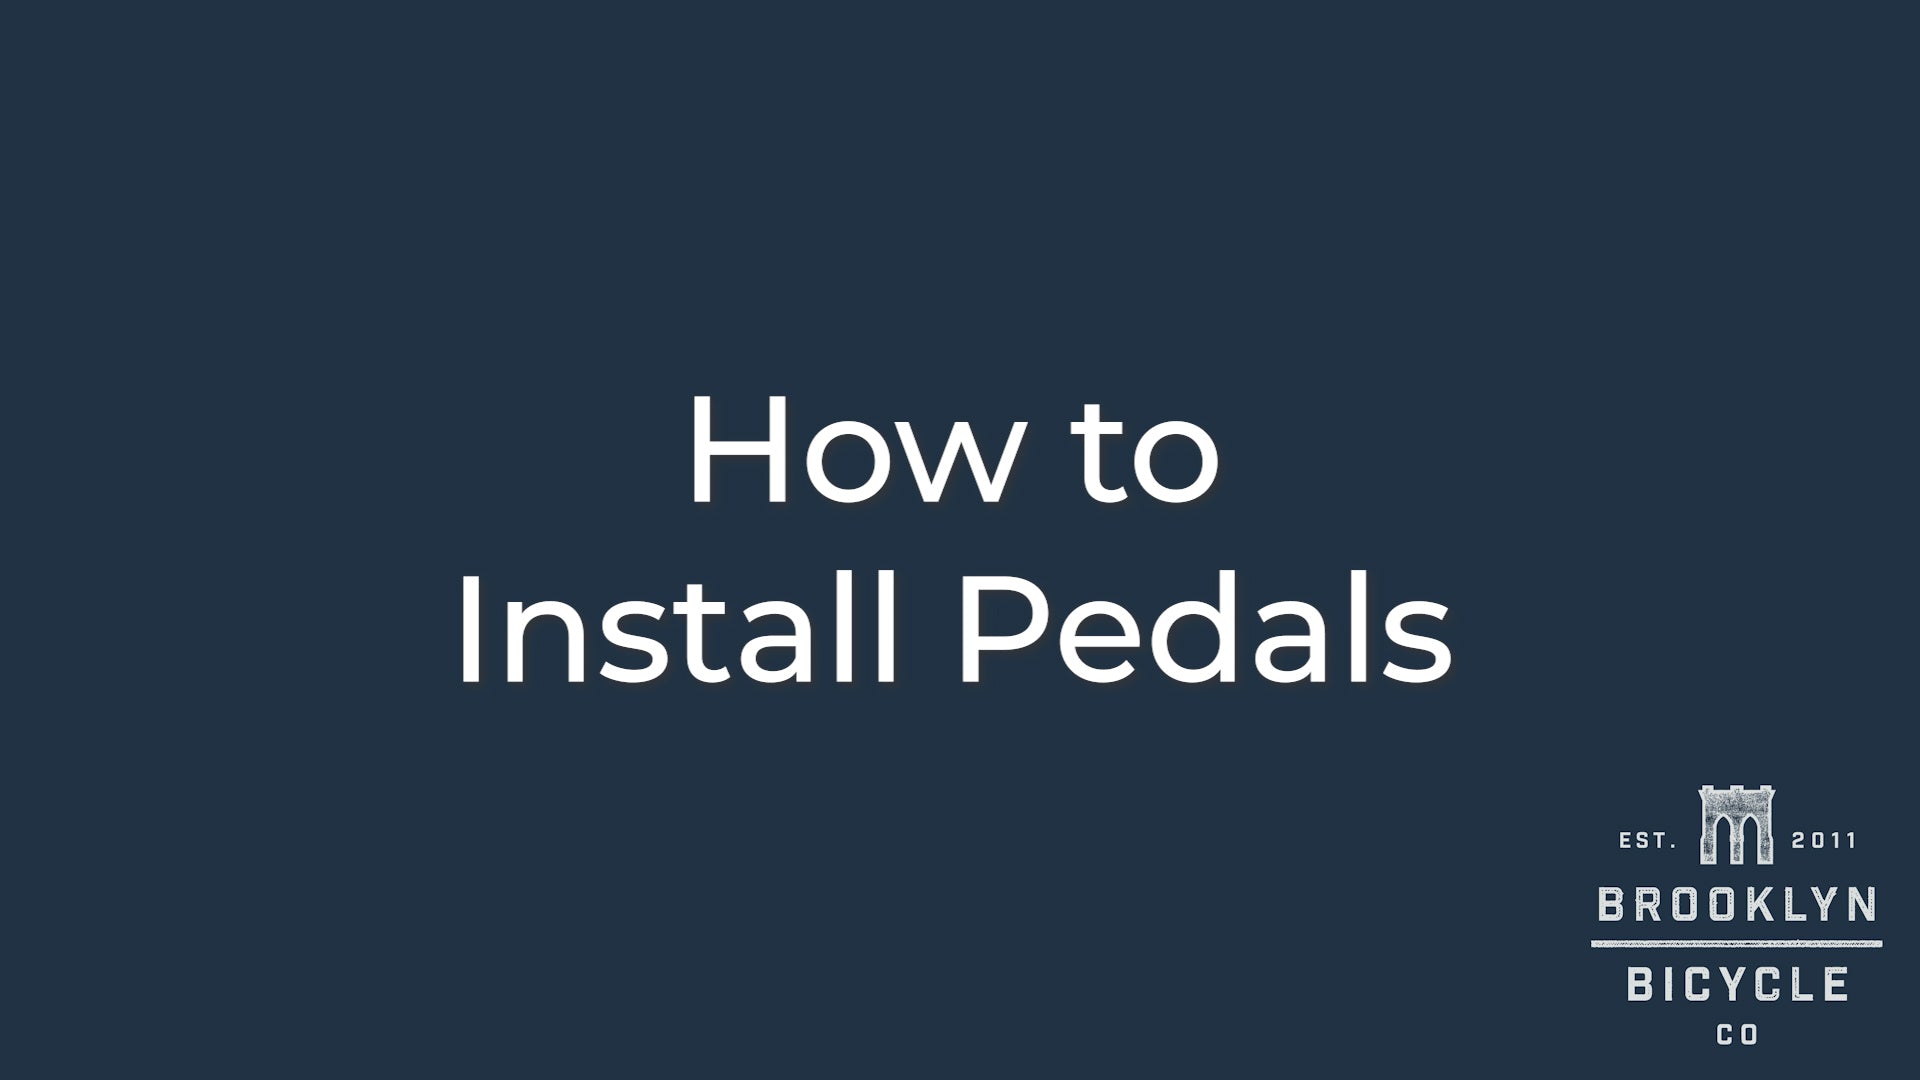 Video: How to Install Pedals